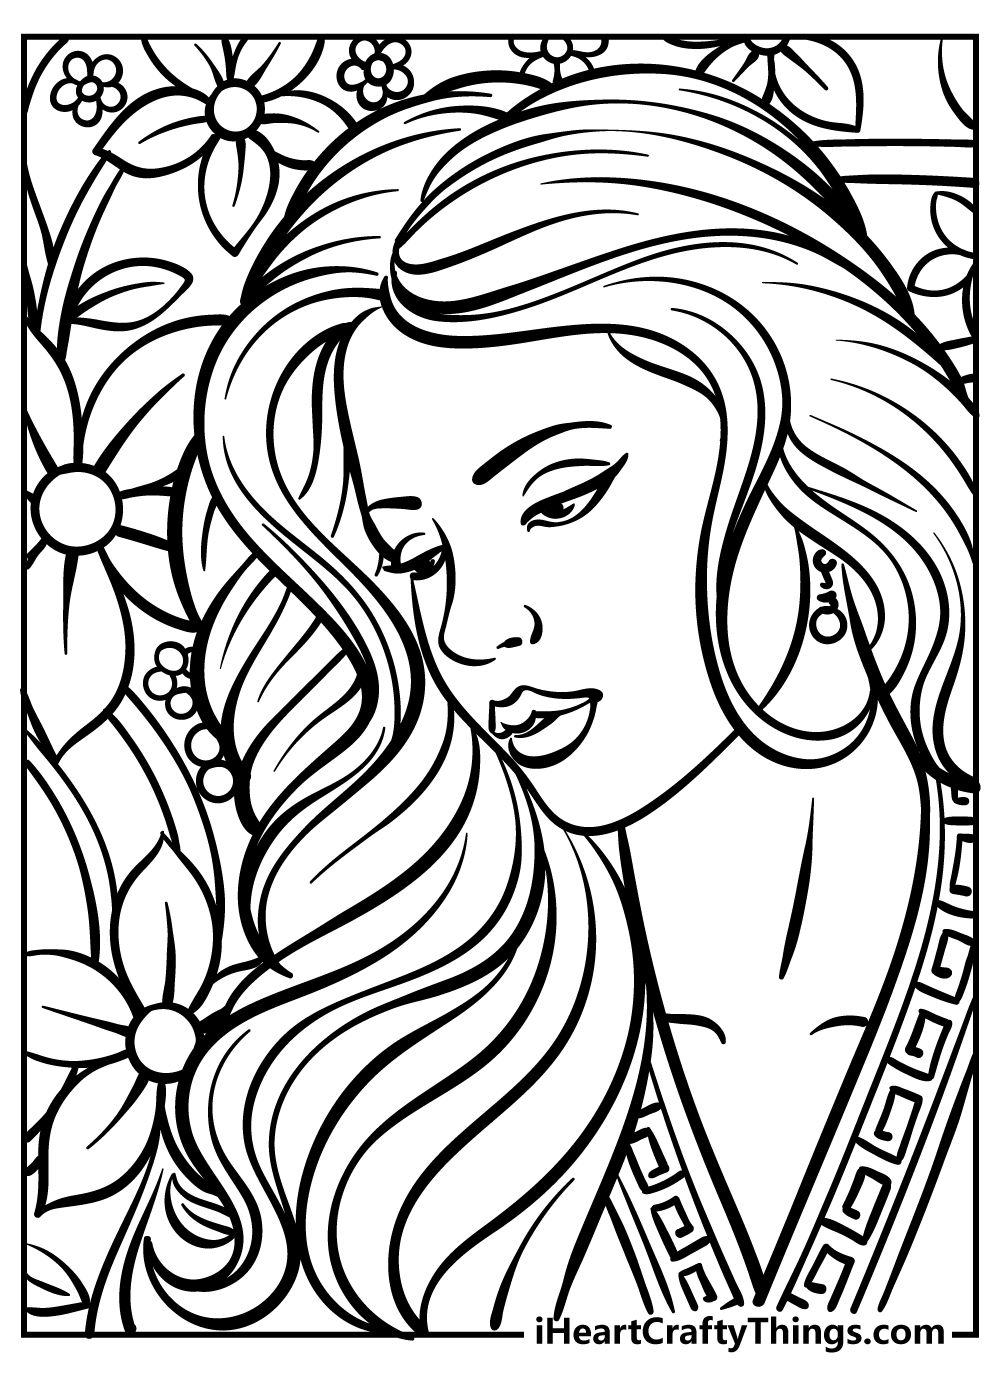 Printable Adult Coloring Pages Updated 20